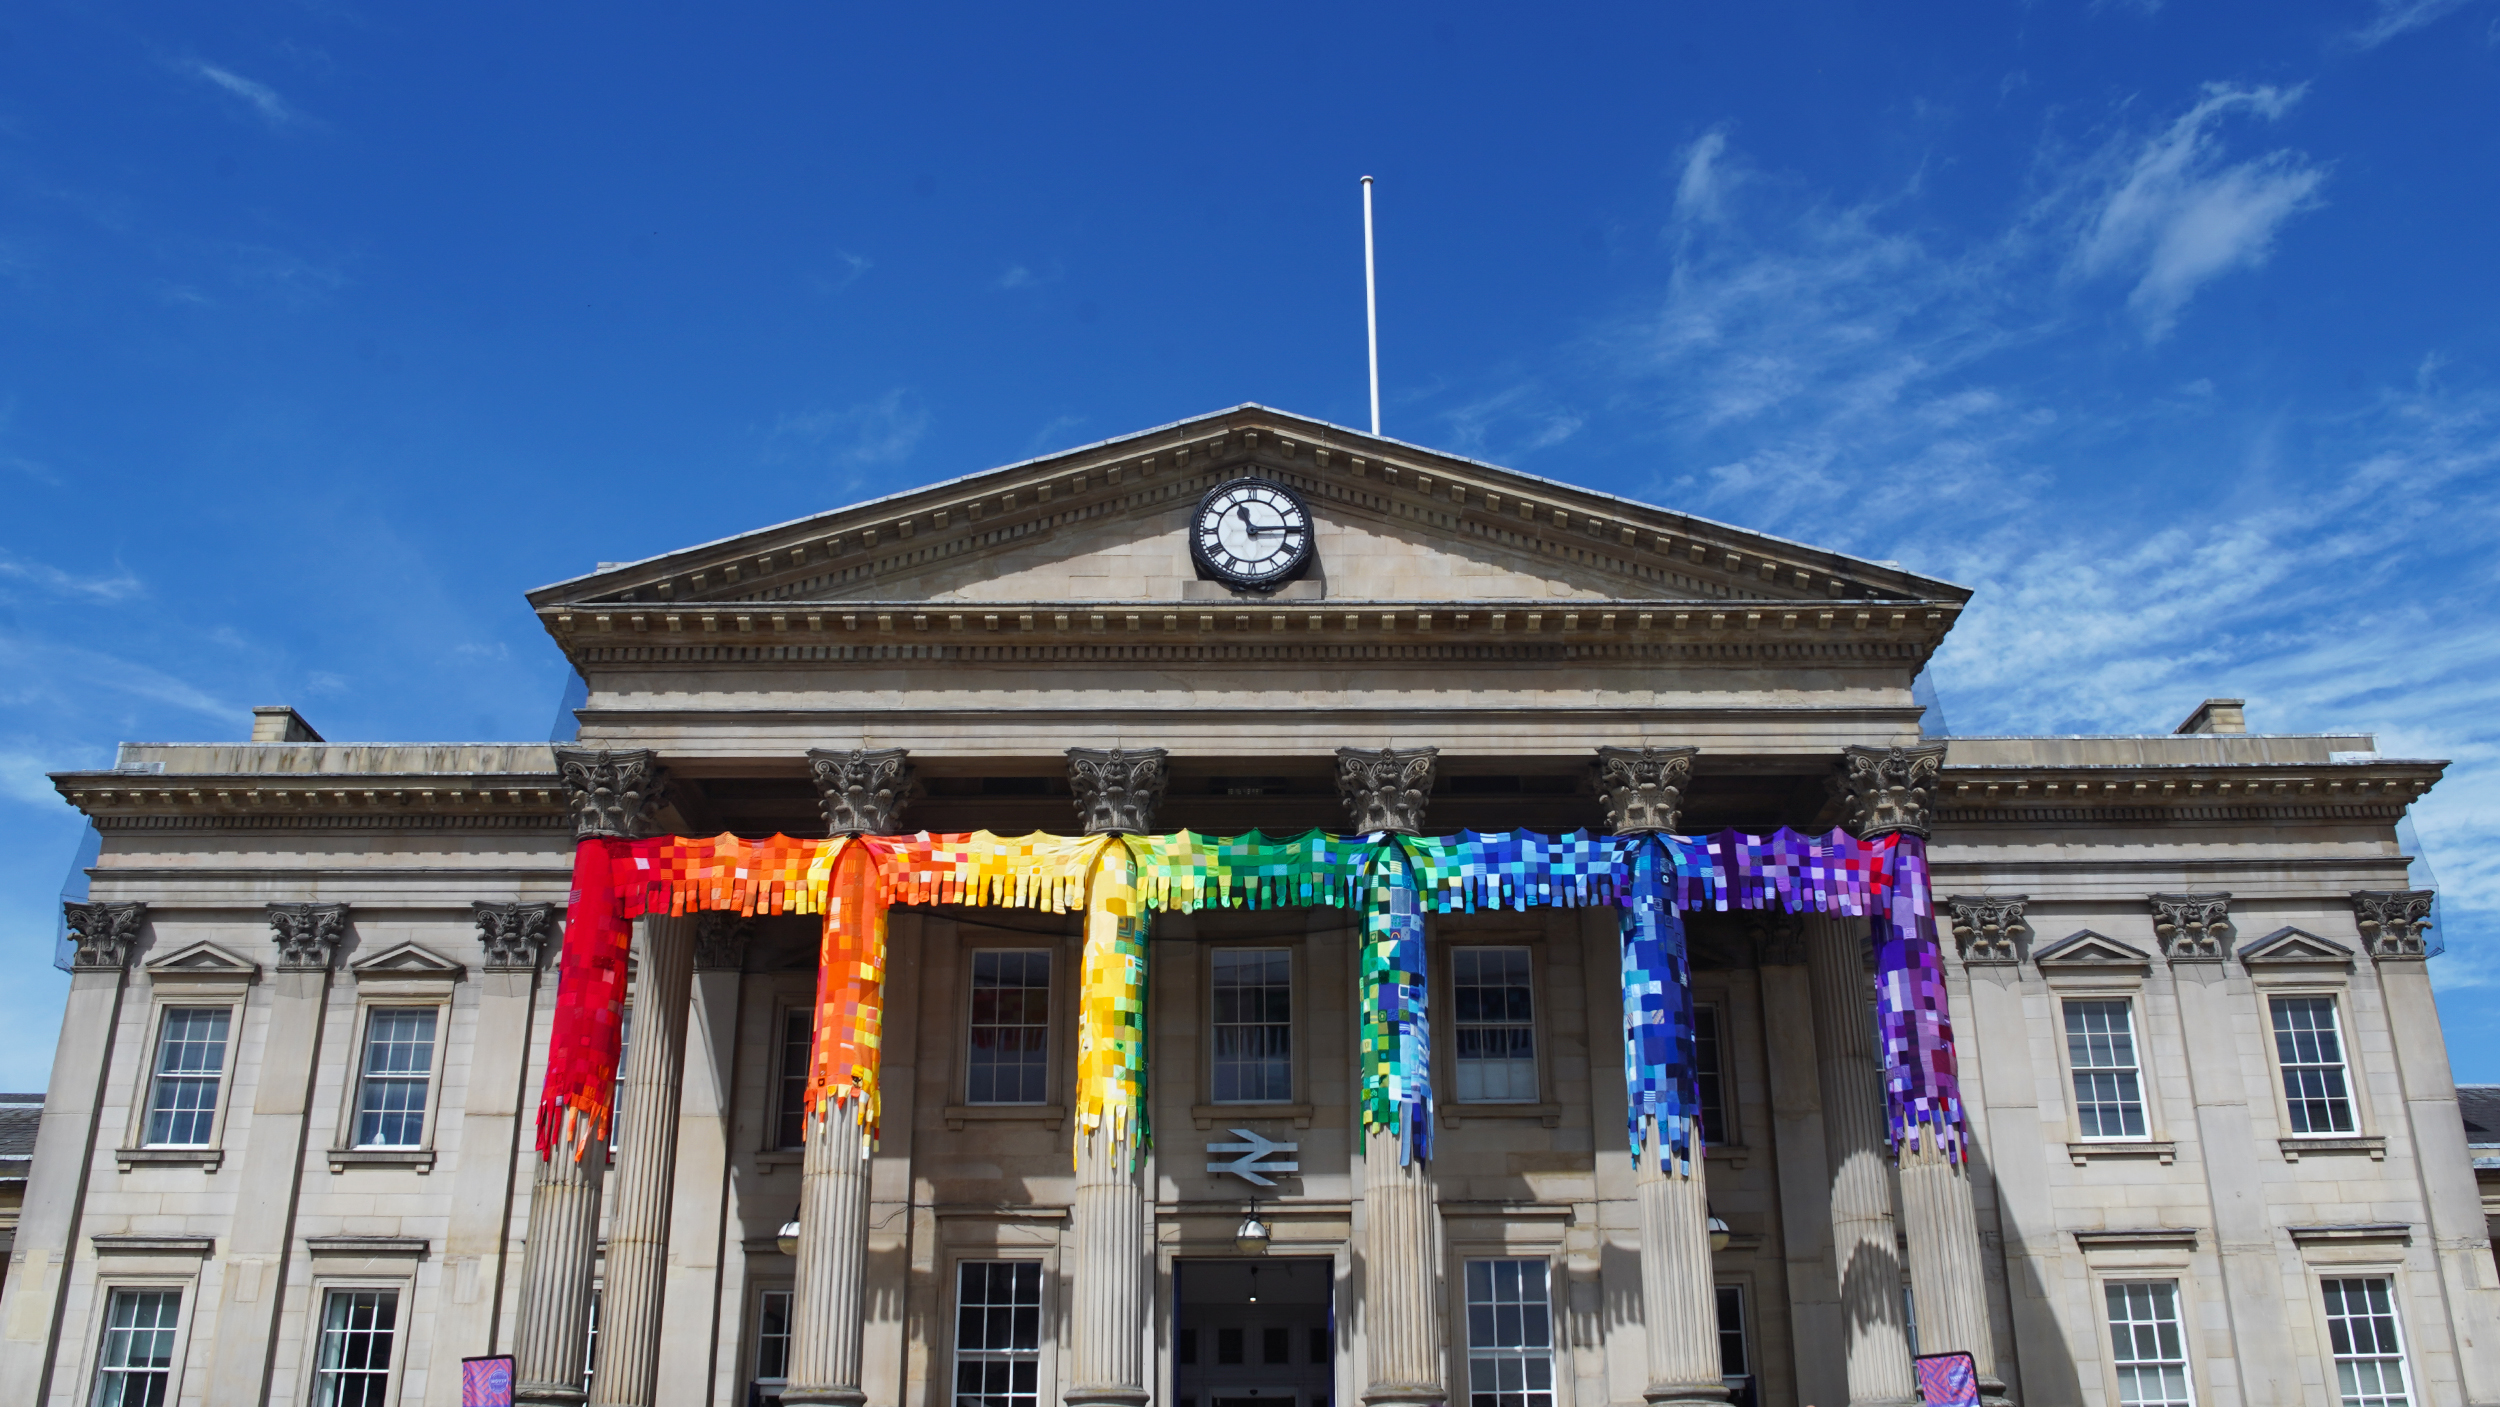 Front of Huddersfield Train Station showing the knitted rainbow decoration on the pillars